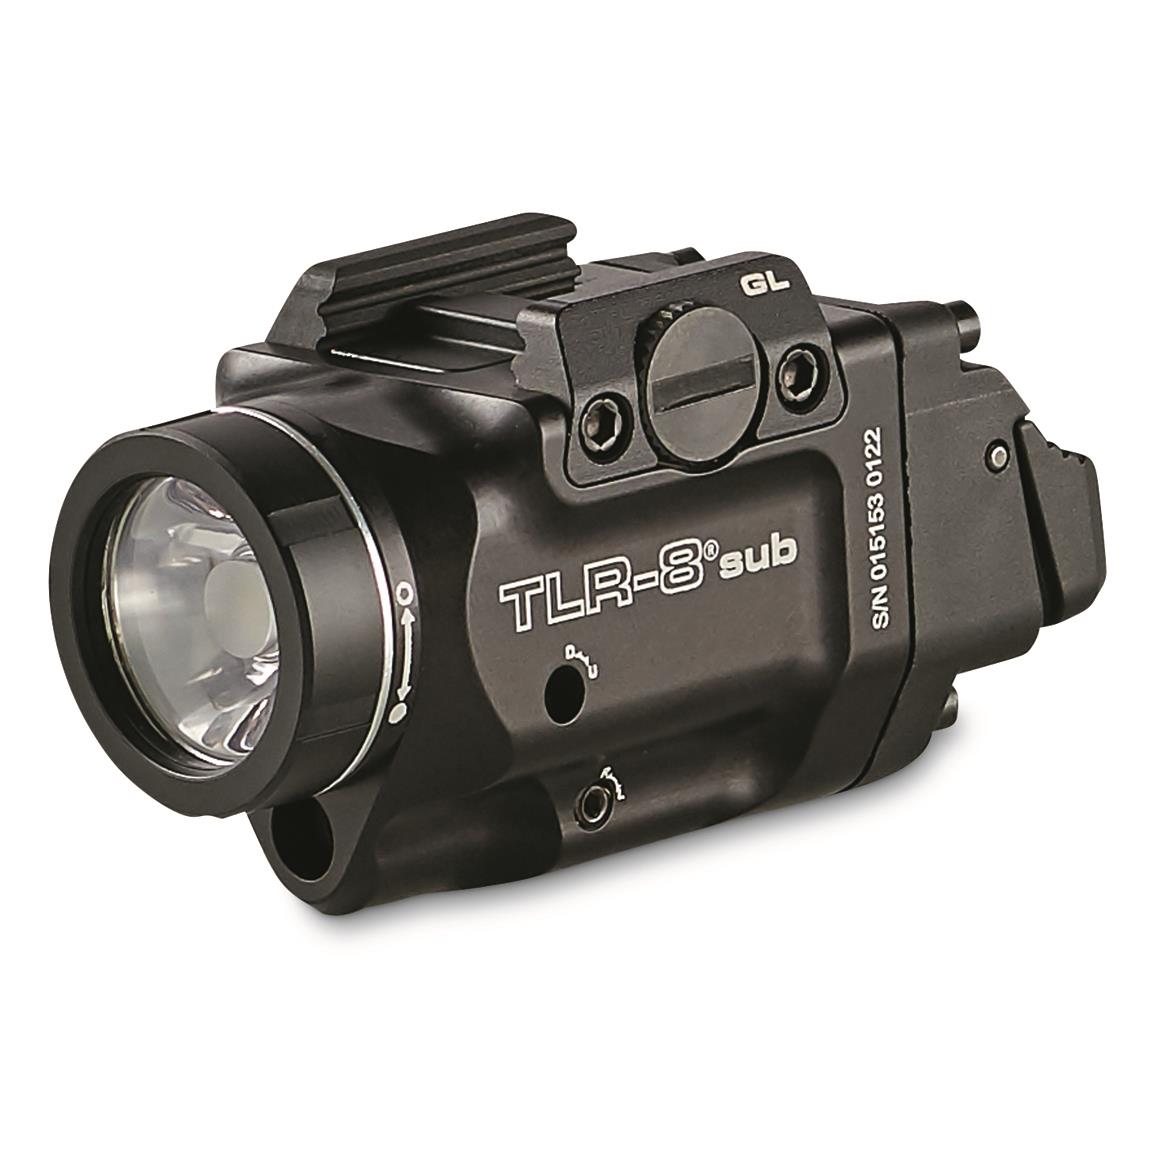 Streamlight TLR-8 Sub Tactical Pistol Light with Red Laser, for Glock 43X/48 MOS